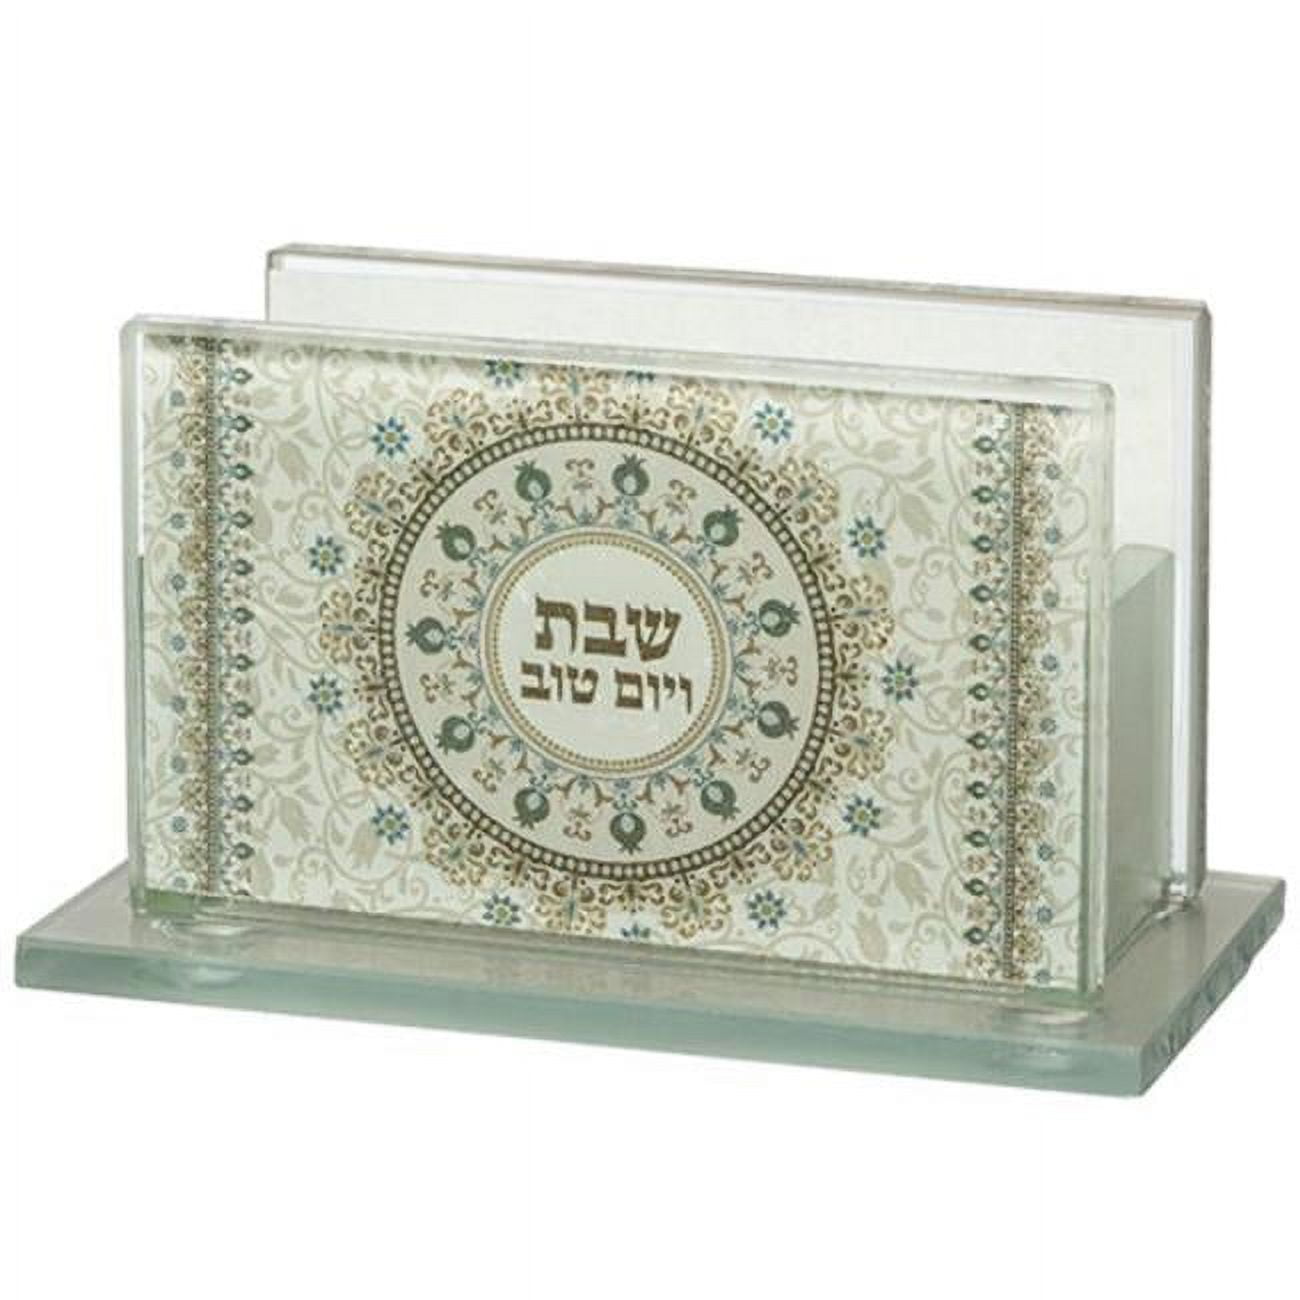 Picture of Art Judaica 59780 7 x 5 cm Glass Match Box Holder with Candle Lighting Print